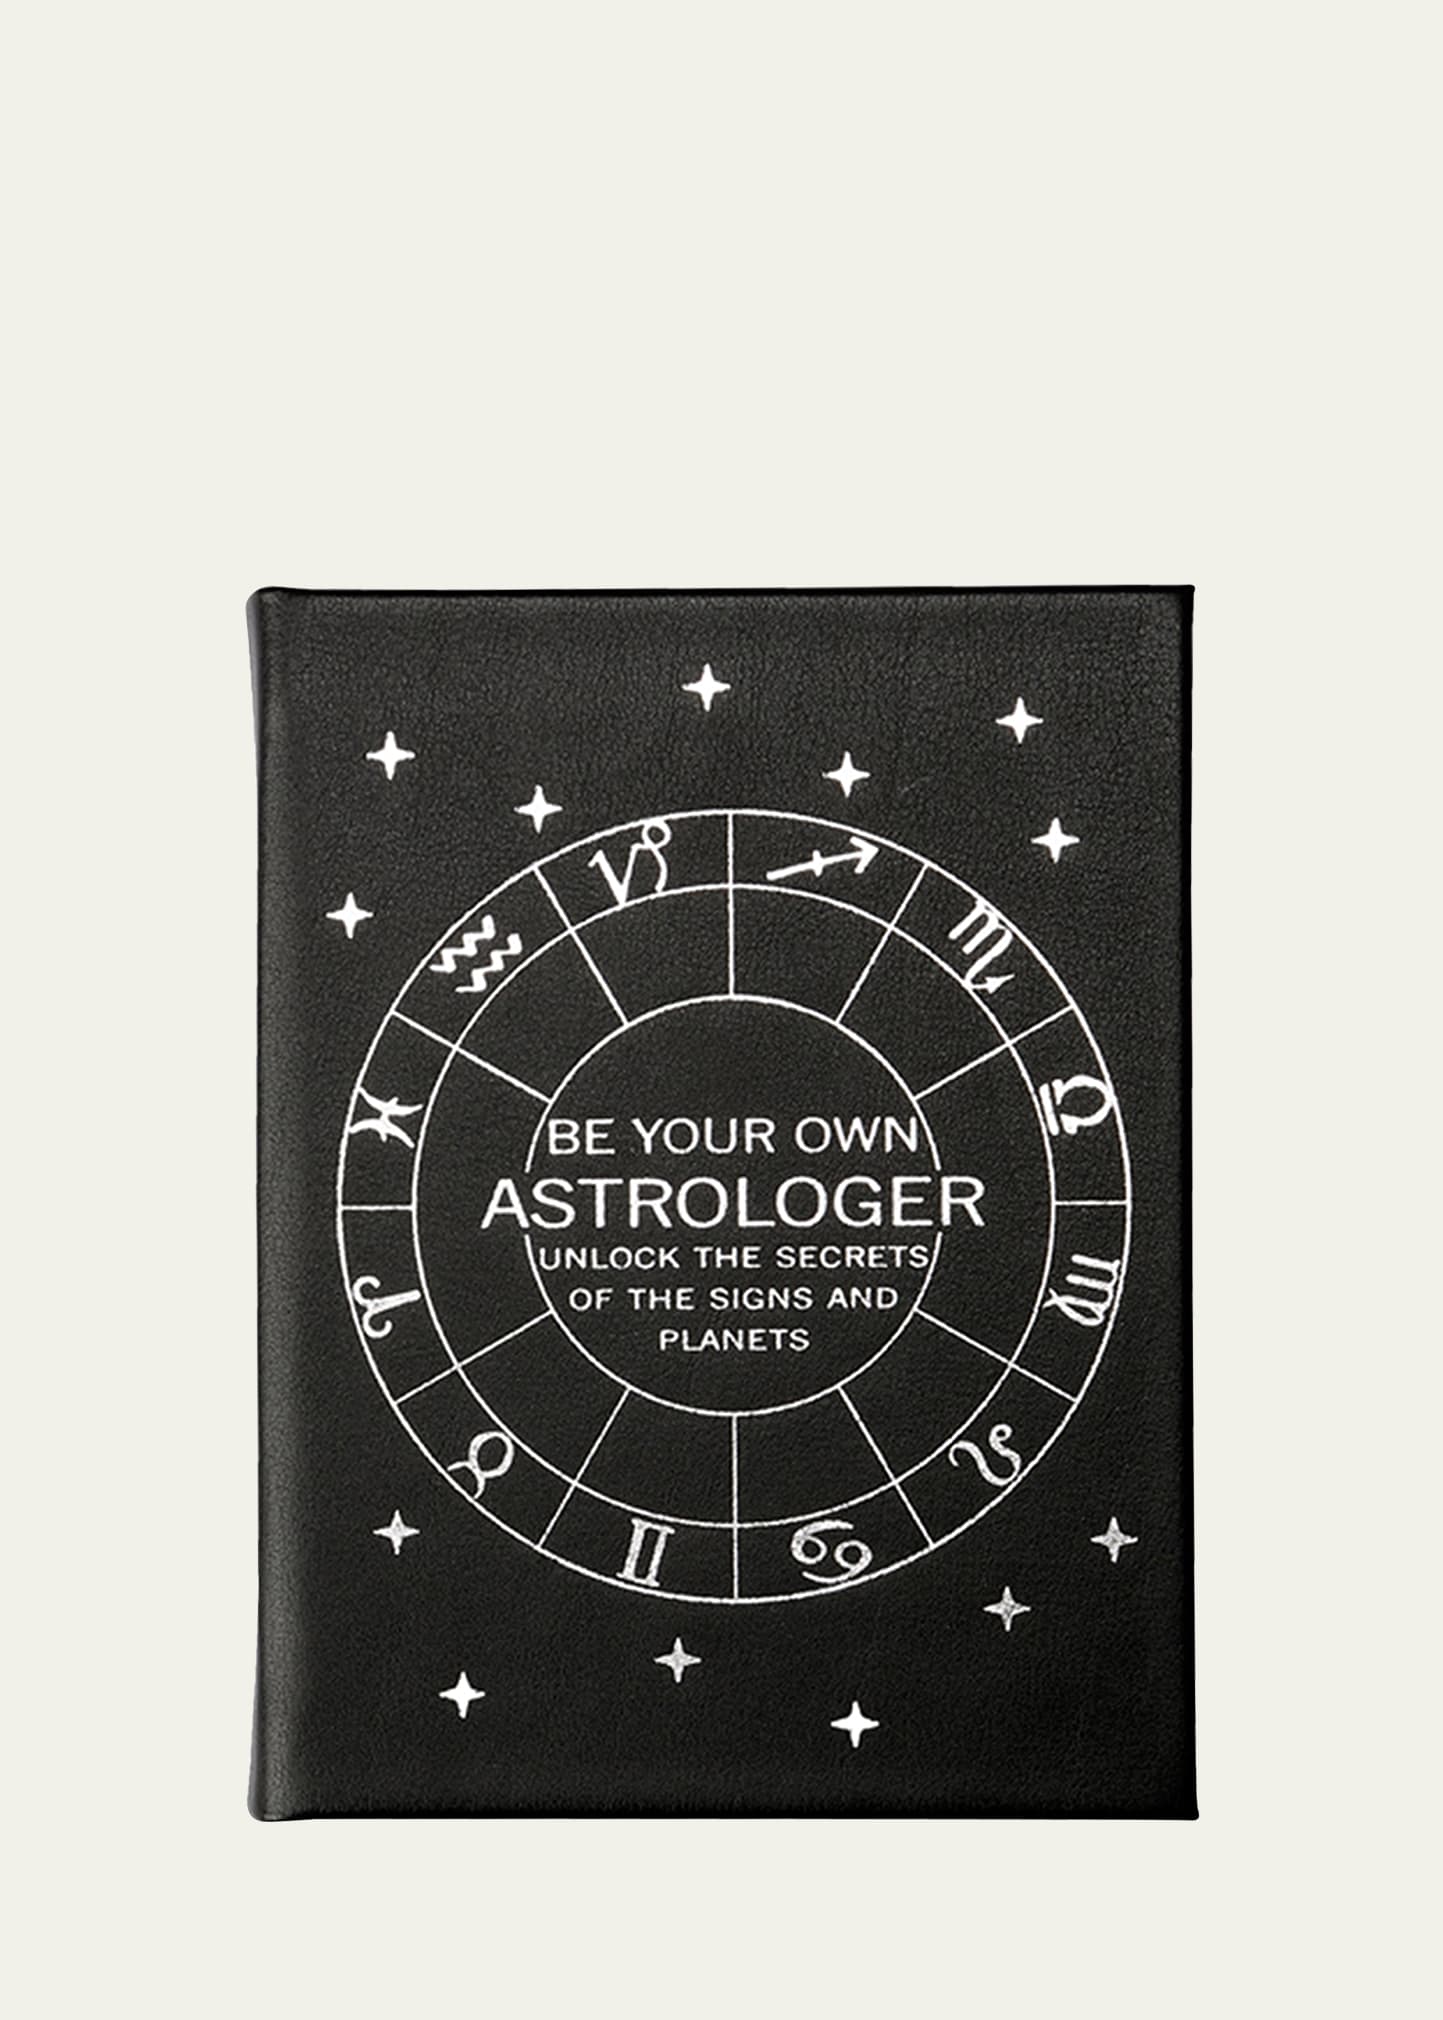 "Be Your Own Astrologer: Unlock the Secrets of the Signs and Planets" Book by Joanna Watters